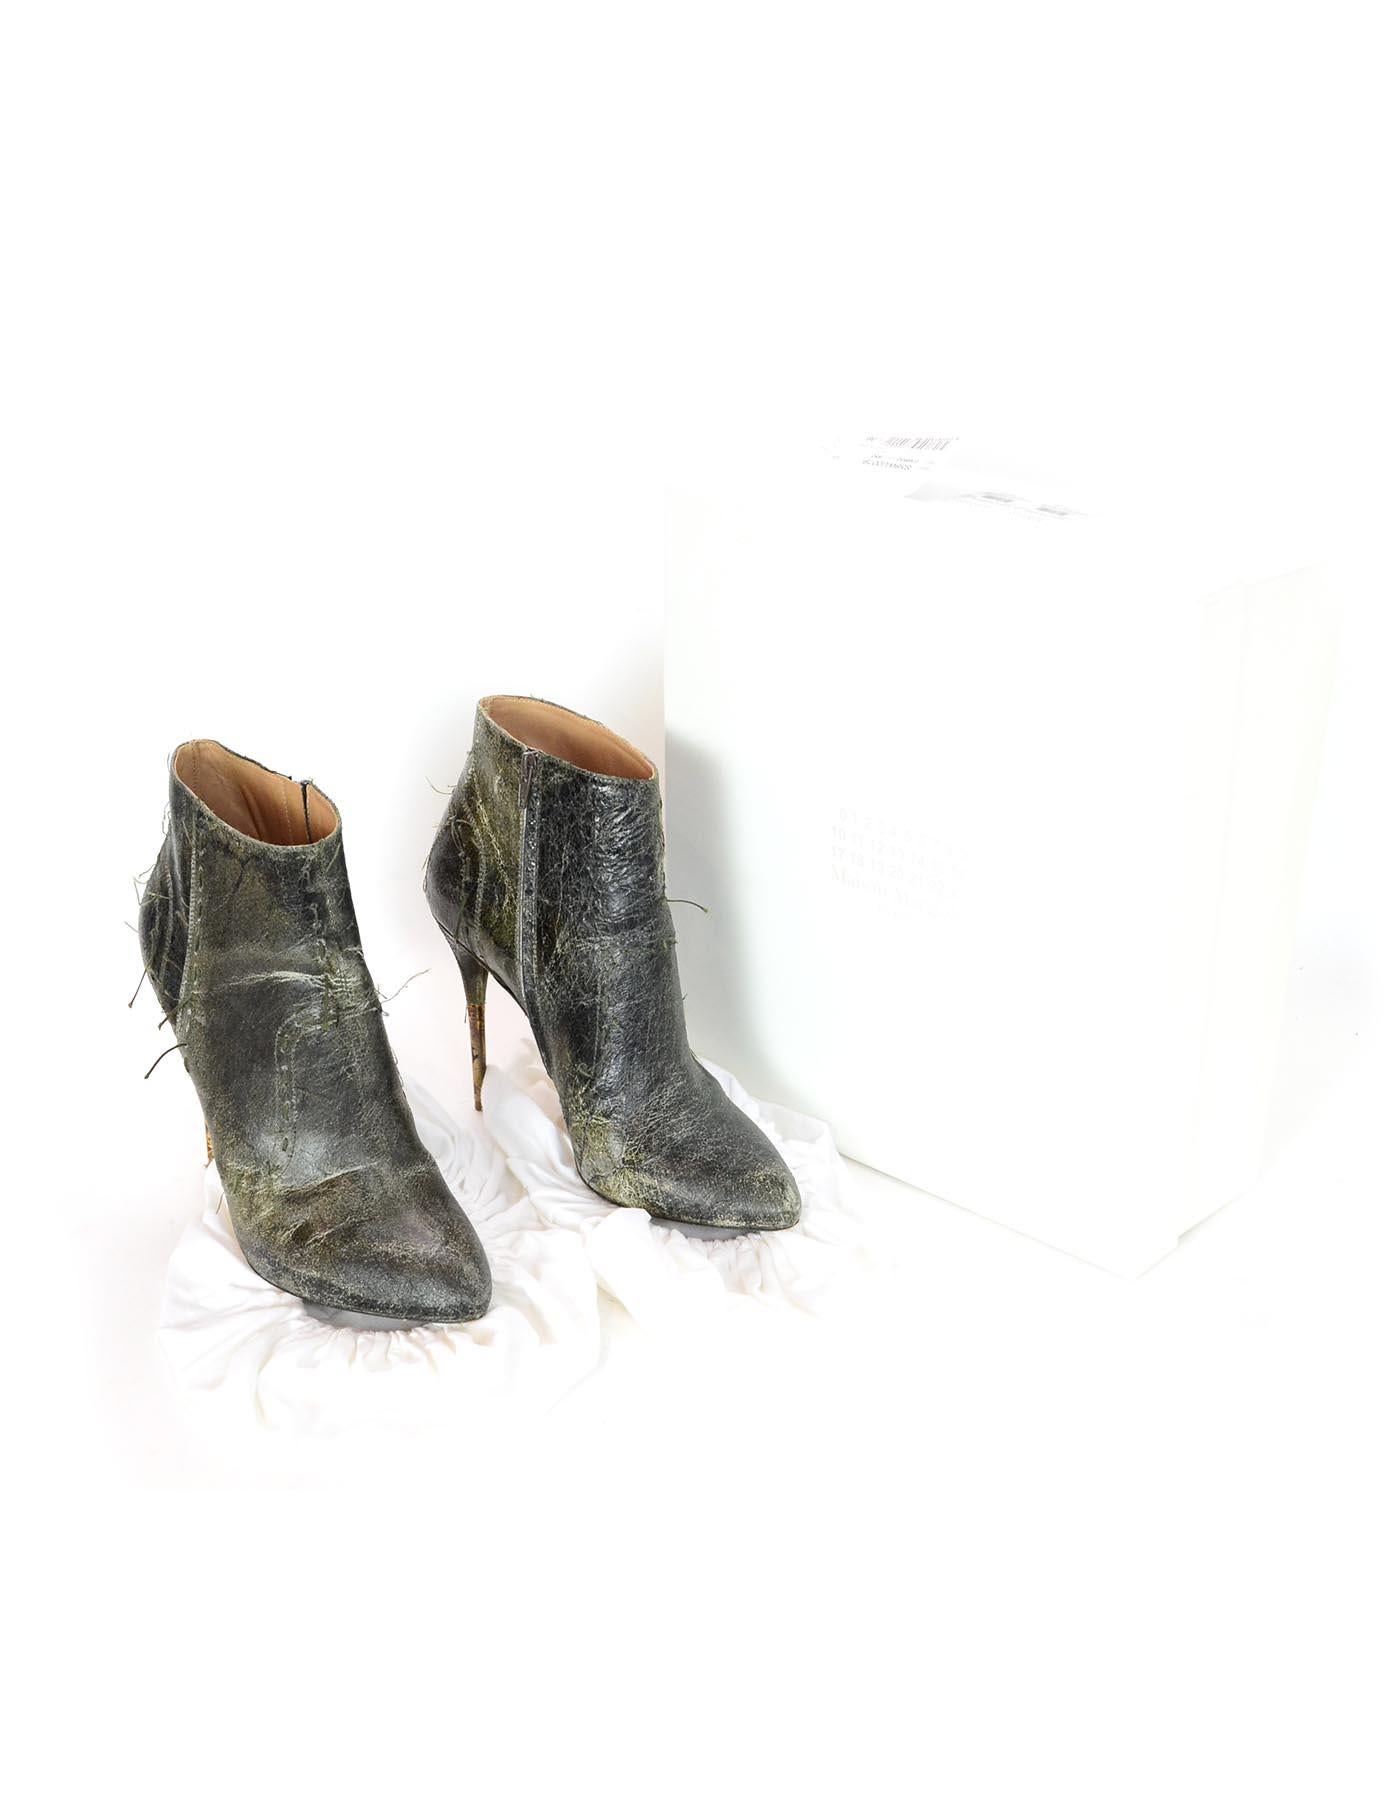 Maison Margiela Distressed Green Leather Heeled Booties Sz 39

Made In: Italy
Color: Green
Hardware: Gray
Materials: Distressed leather 
Closure/Opening: Side zipper 
Overall Condition: Excellent pre-owned top with minor wear to soles
Includes: 